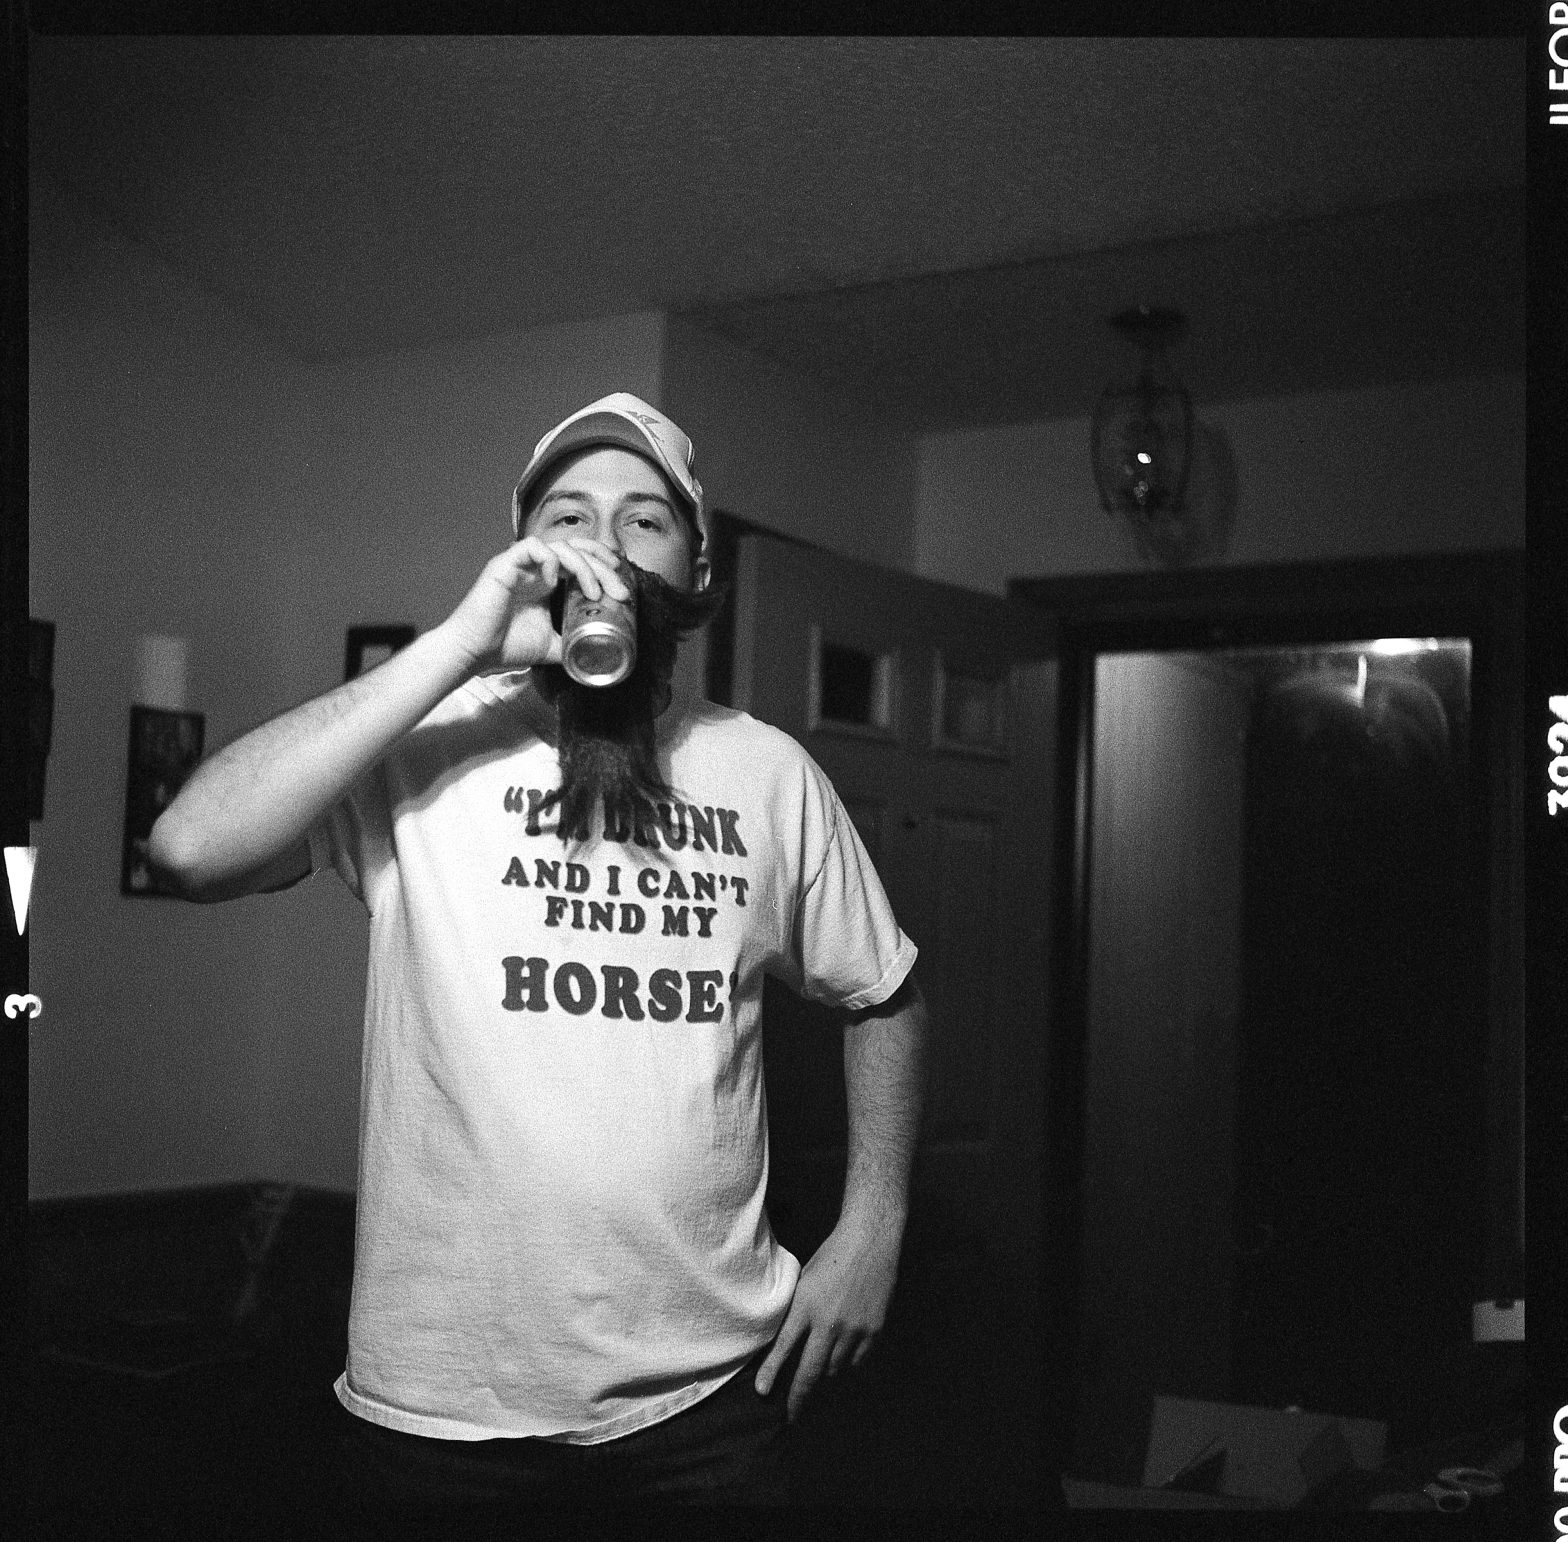 medium format film, man in I'm drunk and can't find my horse shirt